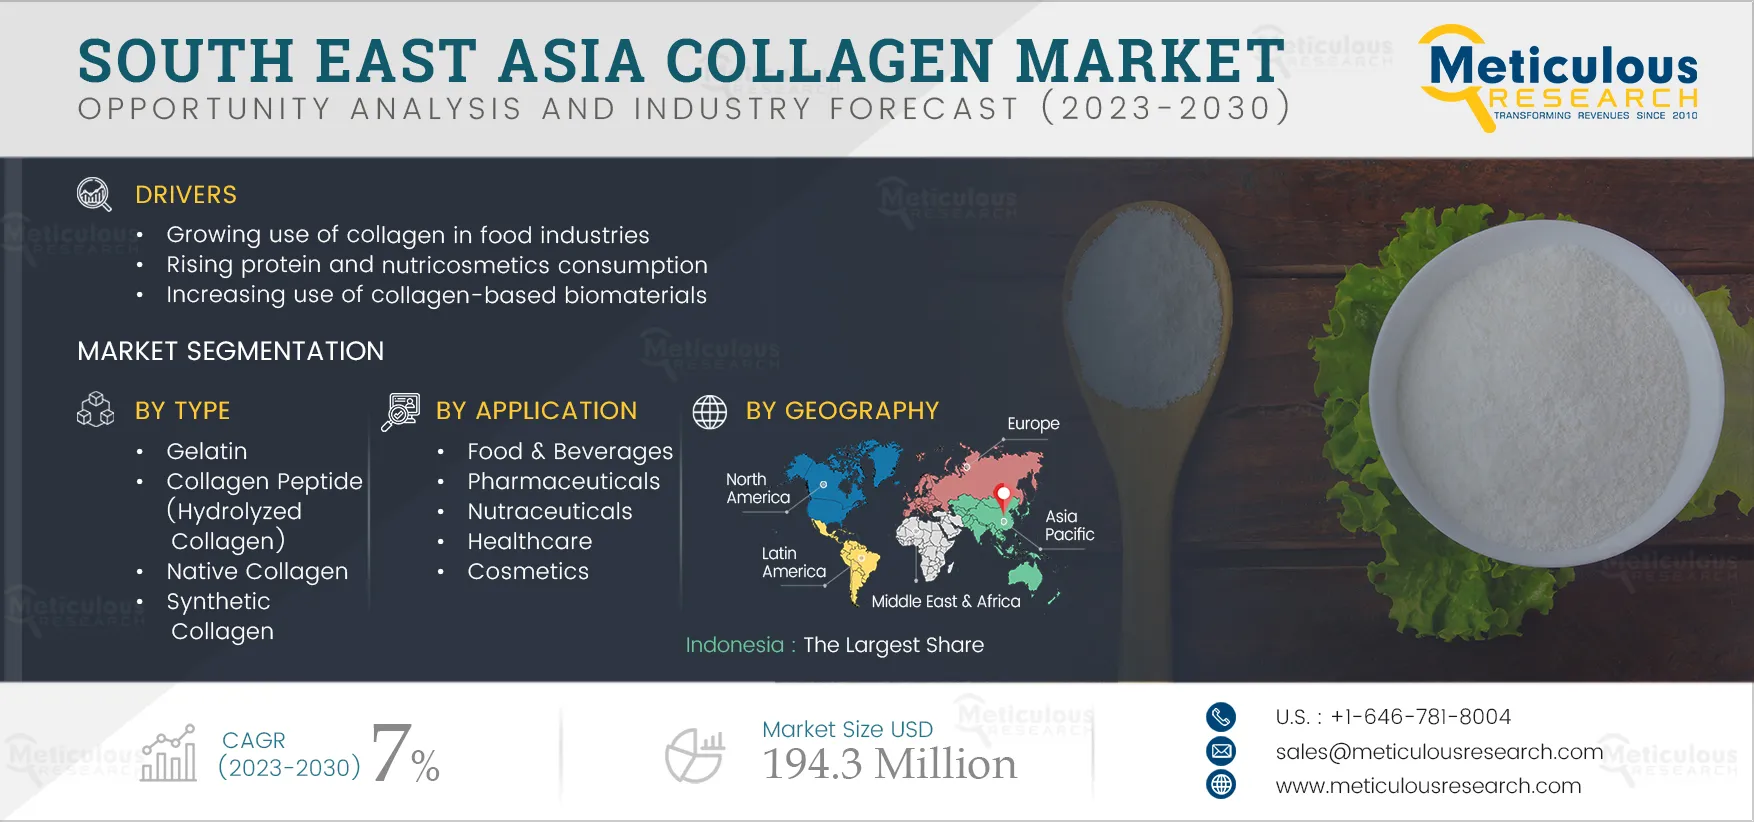 South East Asia Collagen Market